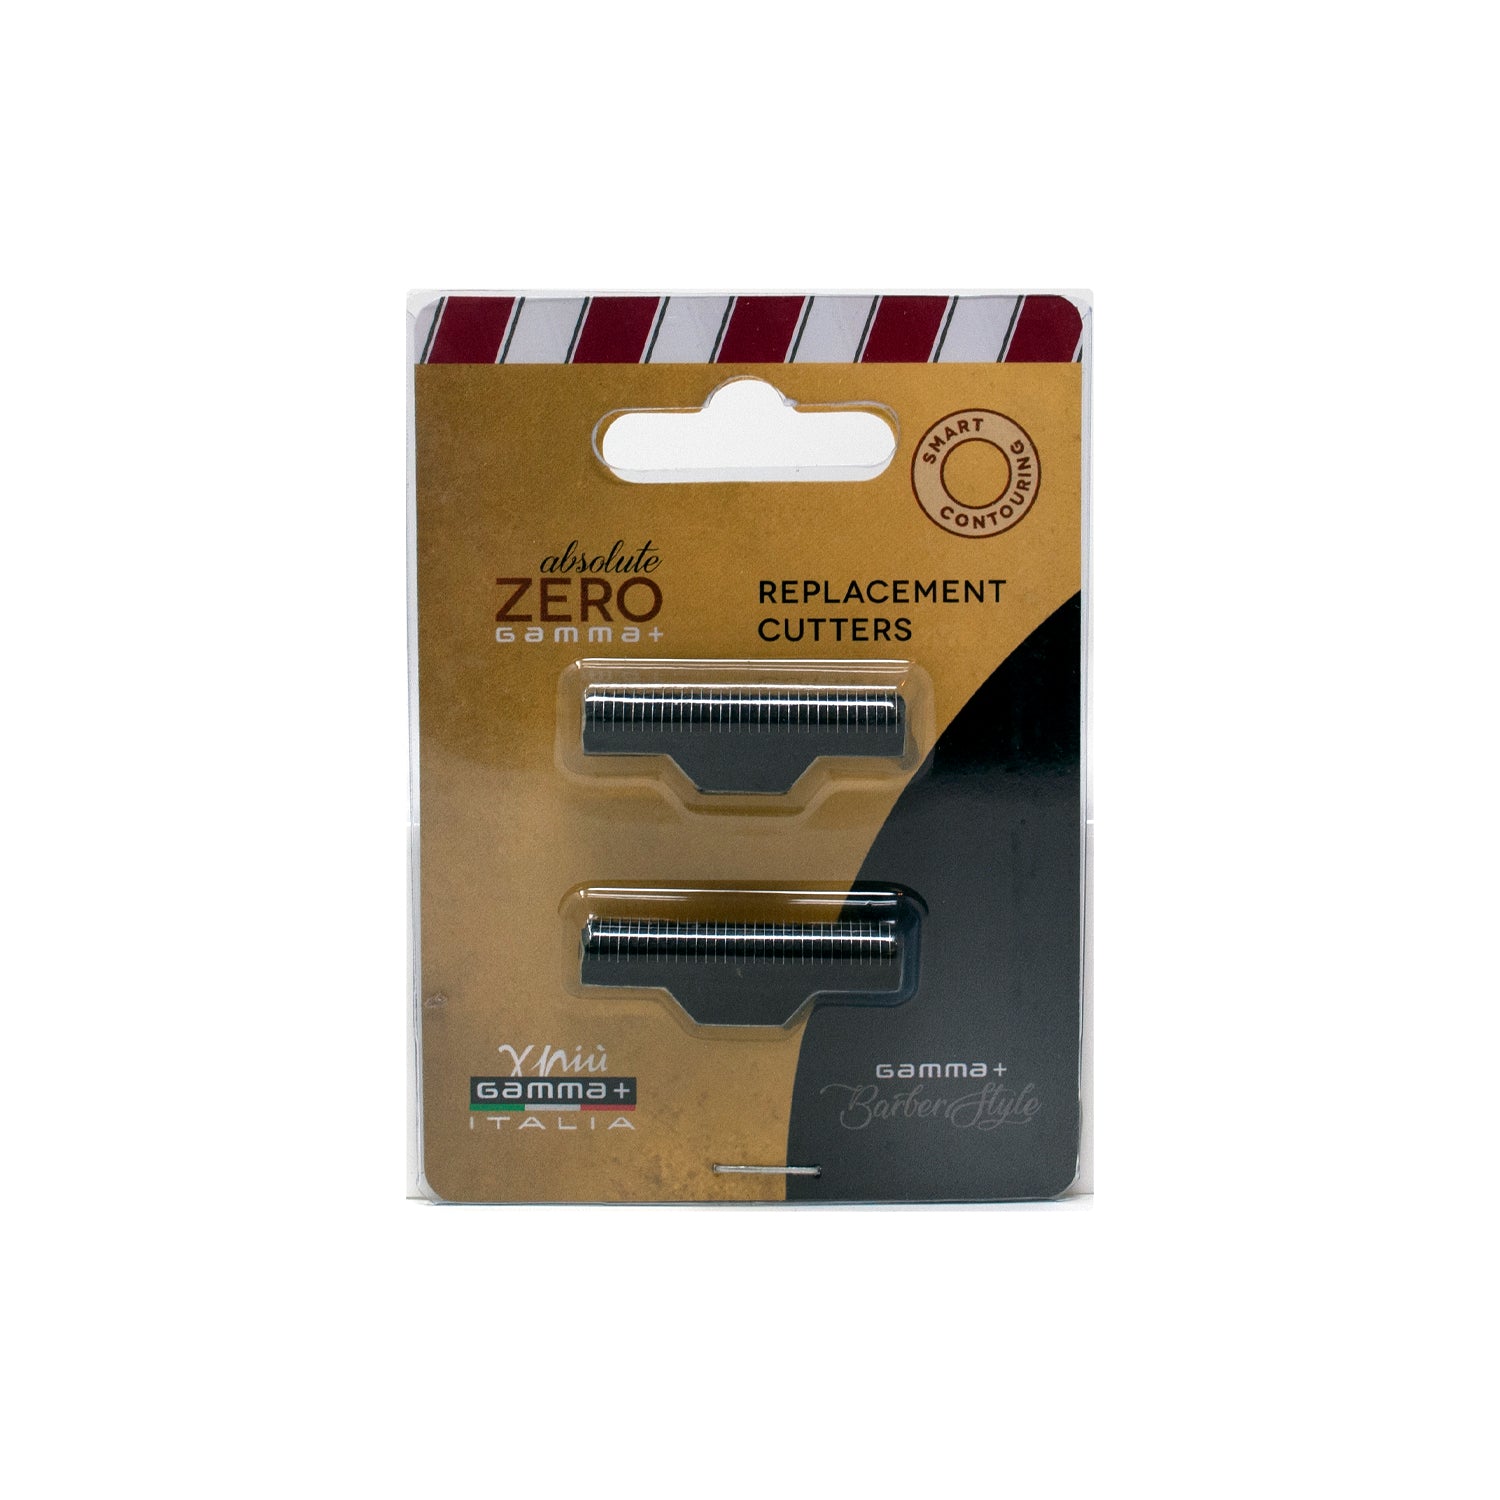 Gamma + Absolute Zero Shaver Replacement Blades